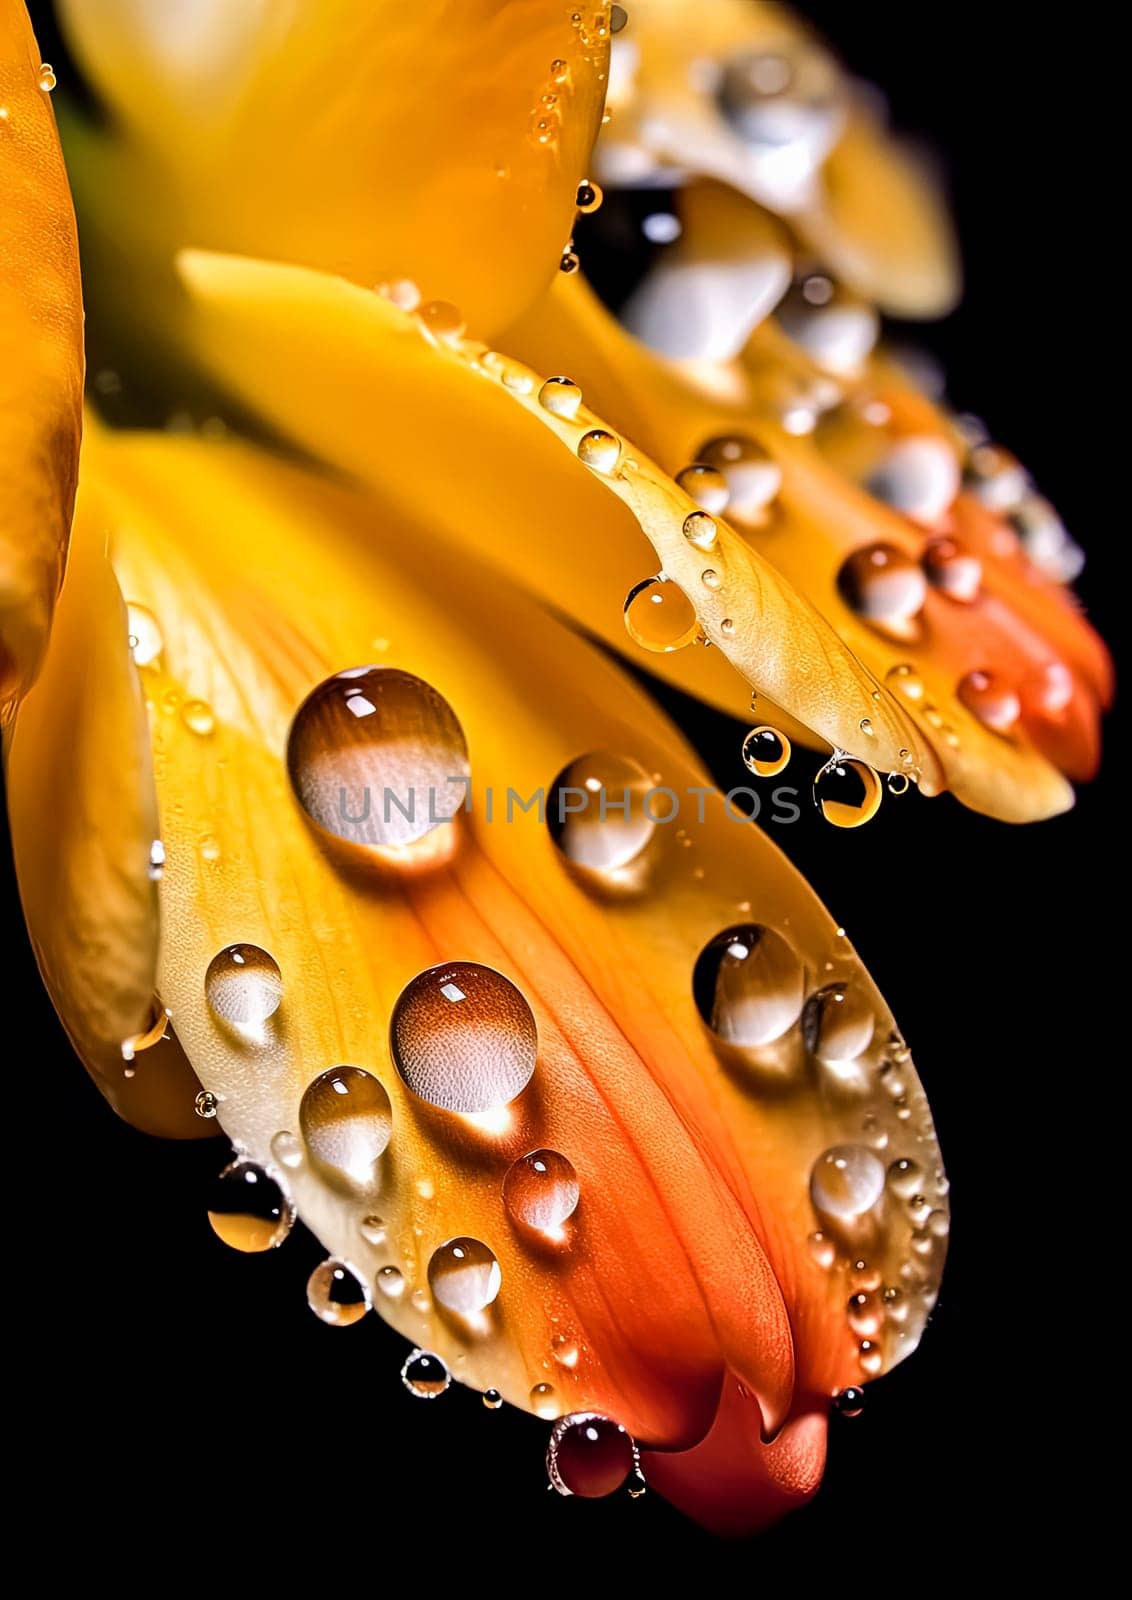 A close up of a flower with droplets of water on it. by Alla_Morozova93